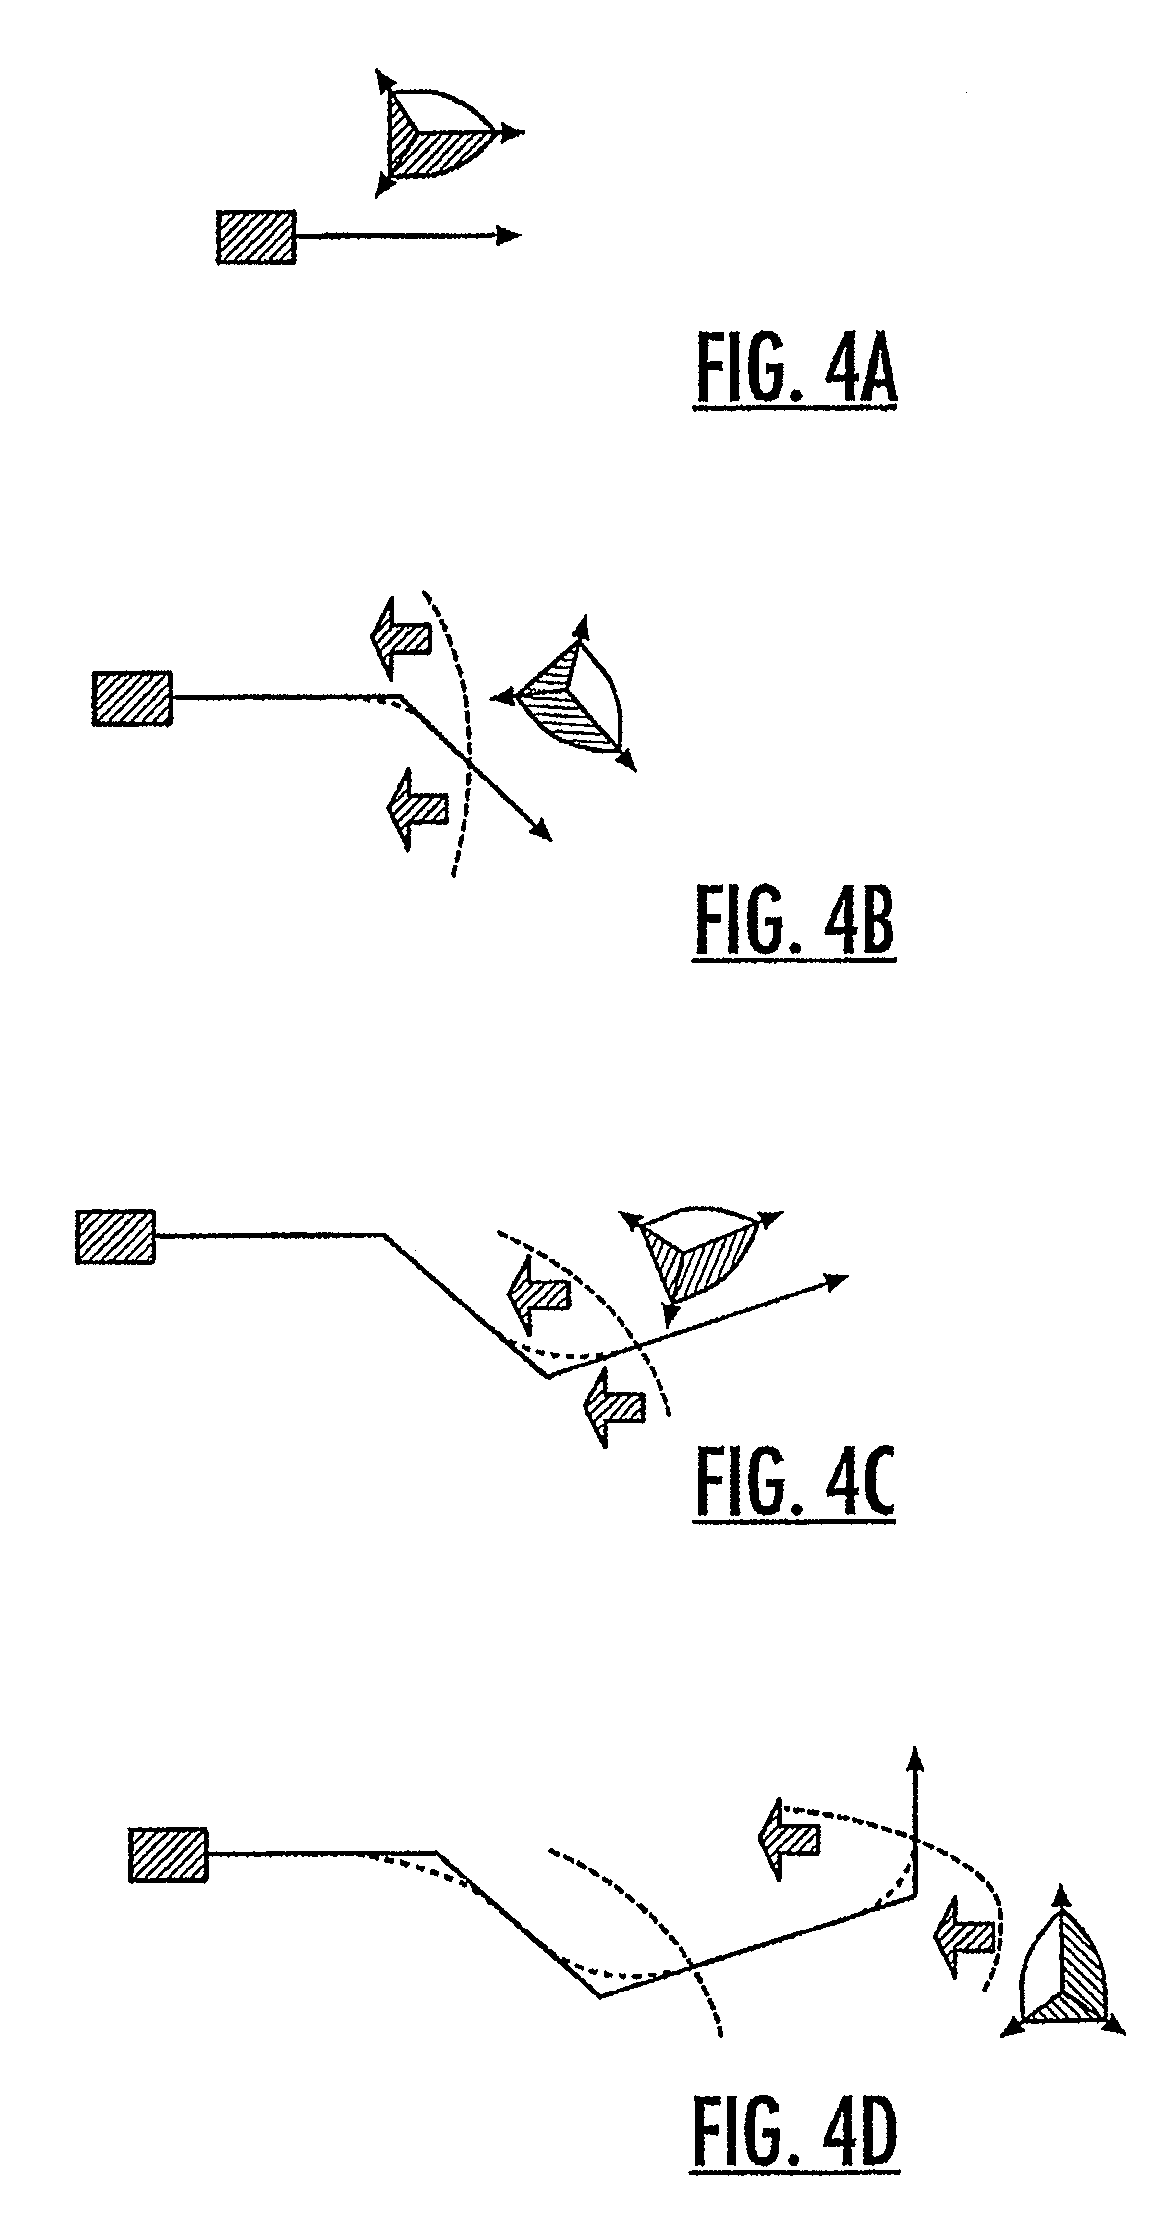 Adaptive distance field constraint for designing a route for a transport element